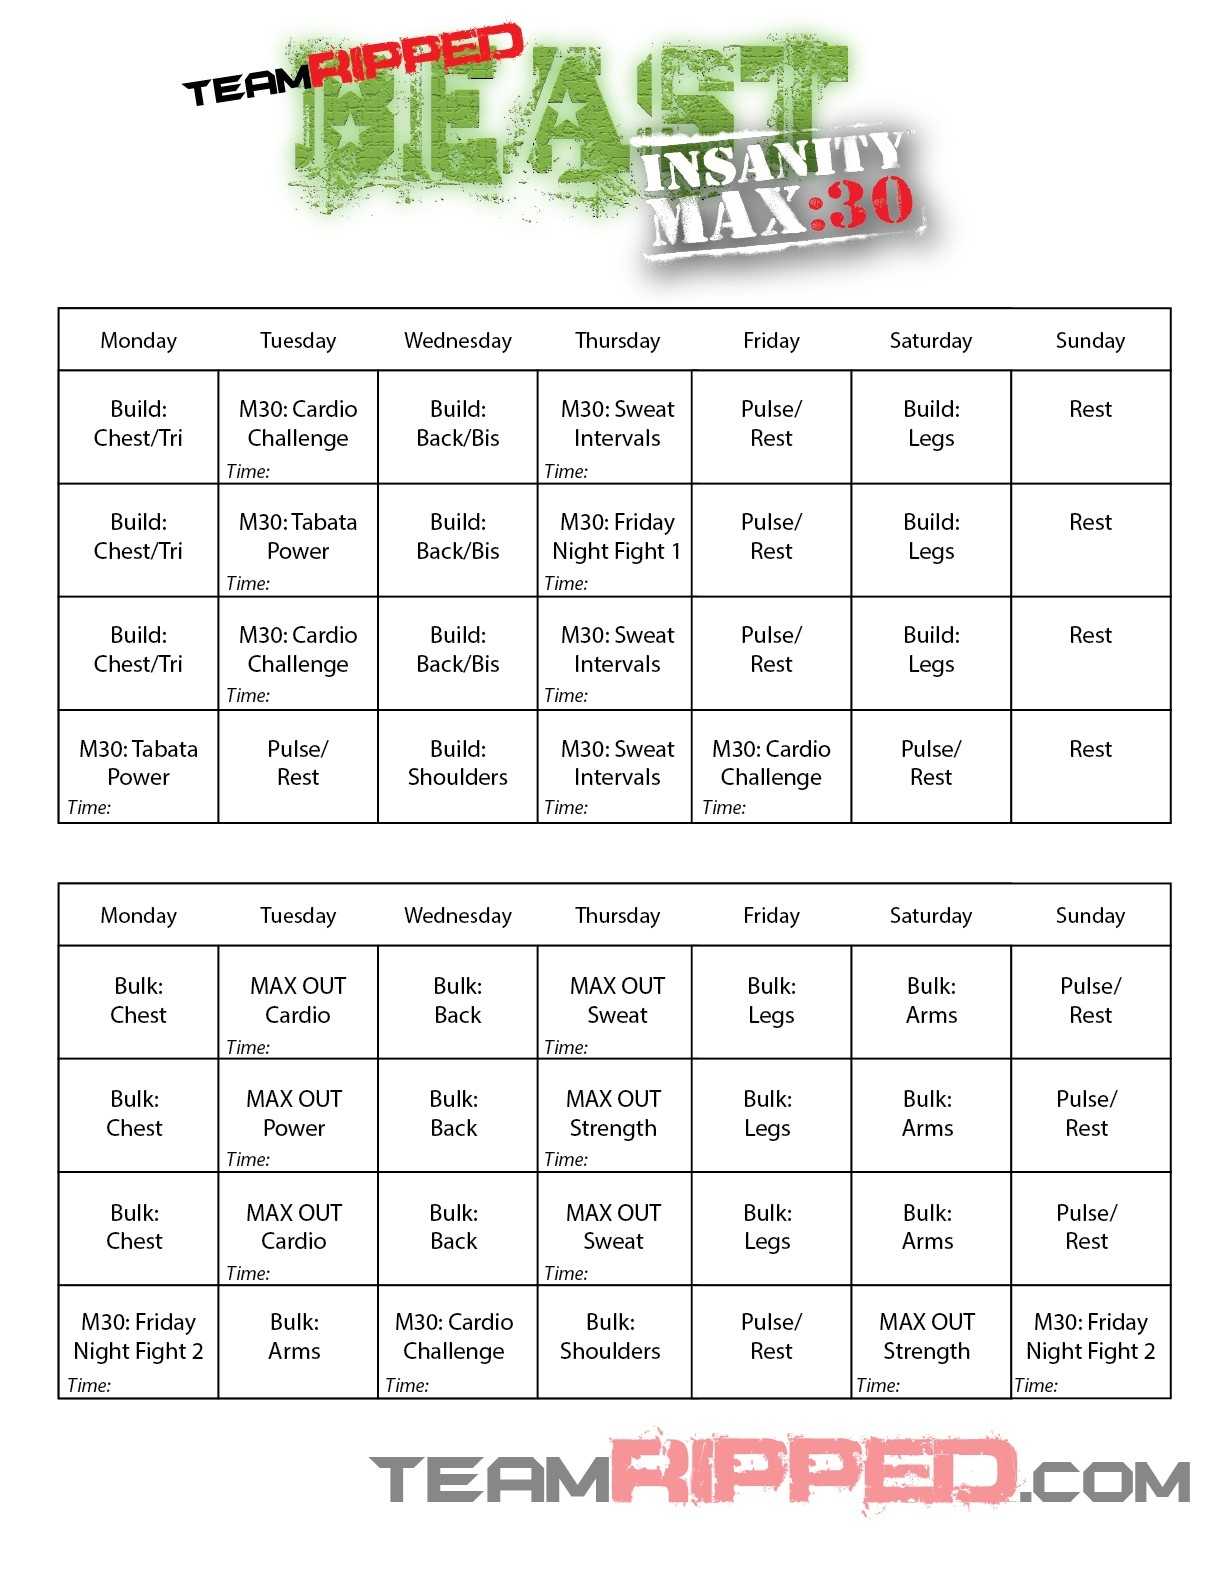 Insanity Max 30 Calendar Month 2 | Example Calendar Printable within Insanity Max 30 Pdf